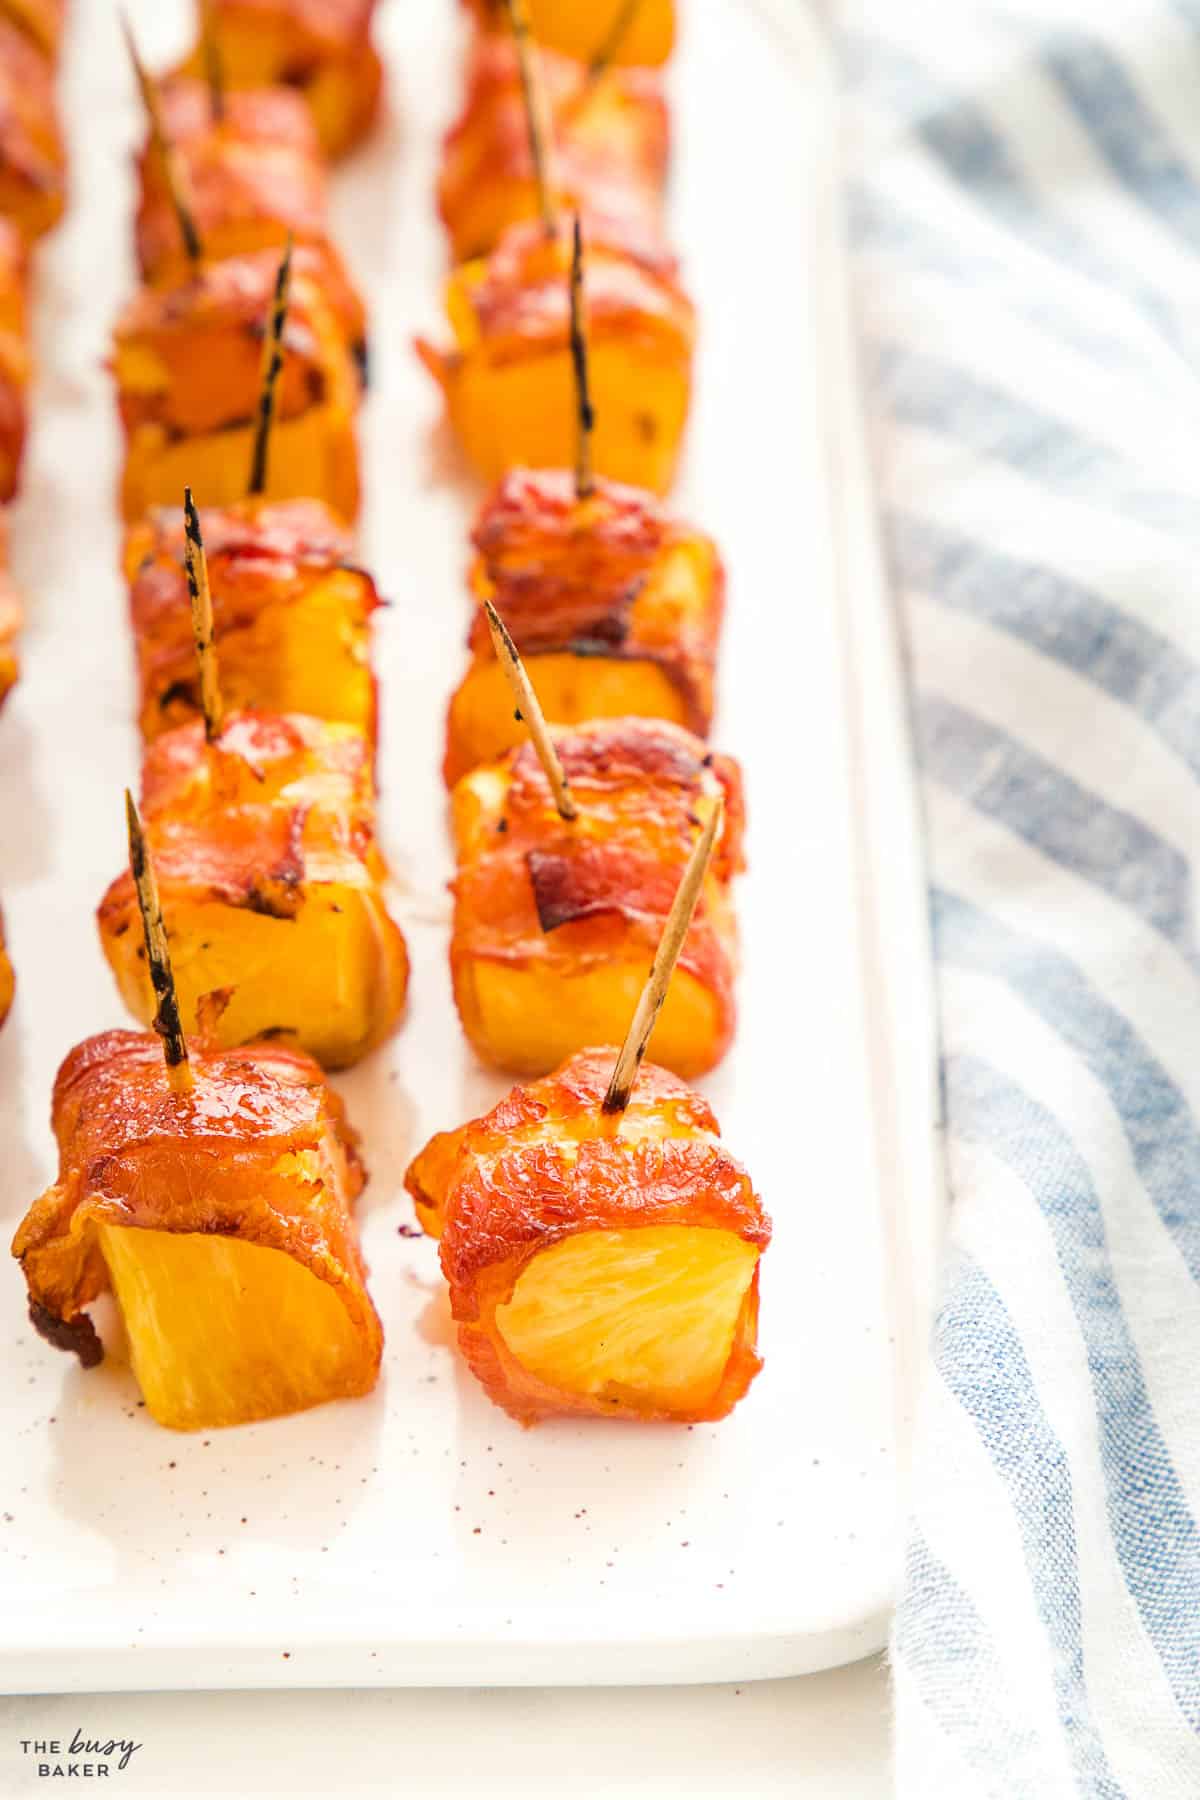 pineapple wrapped in bacon with toothpicks